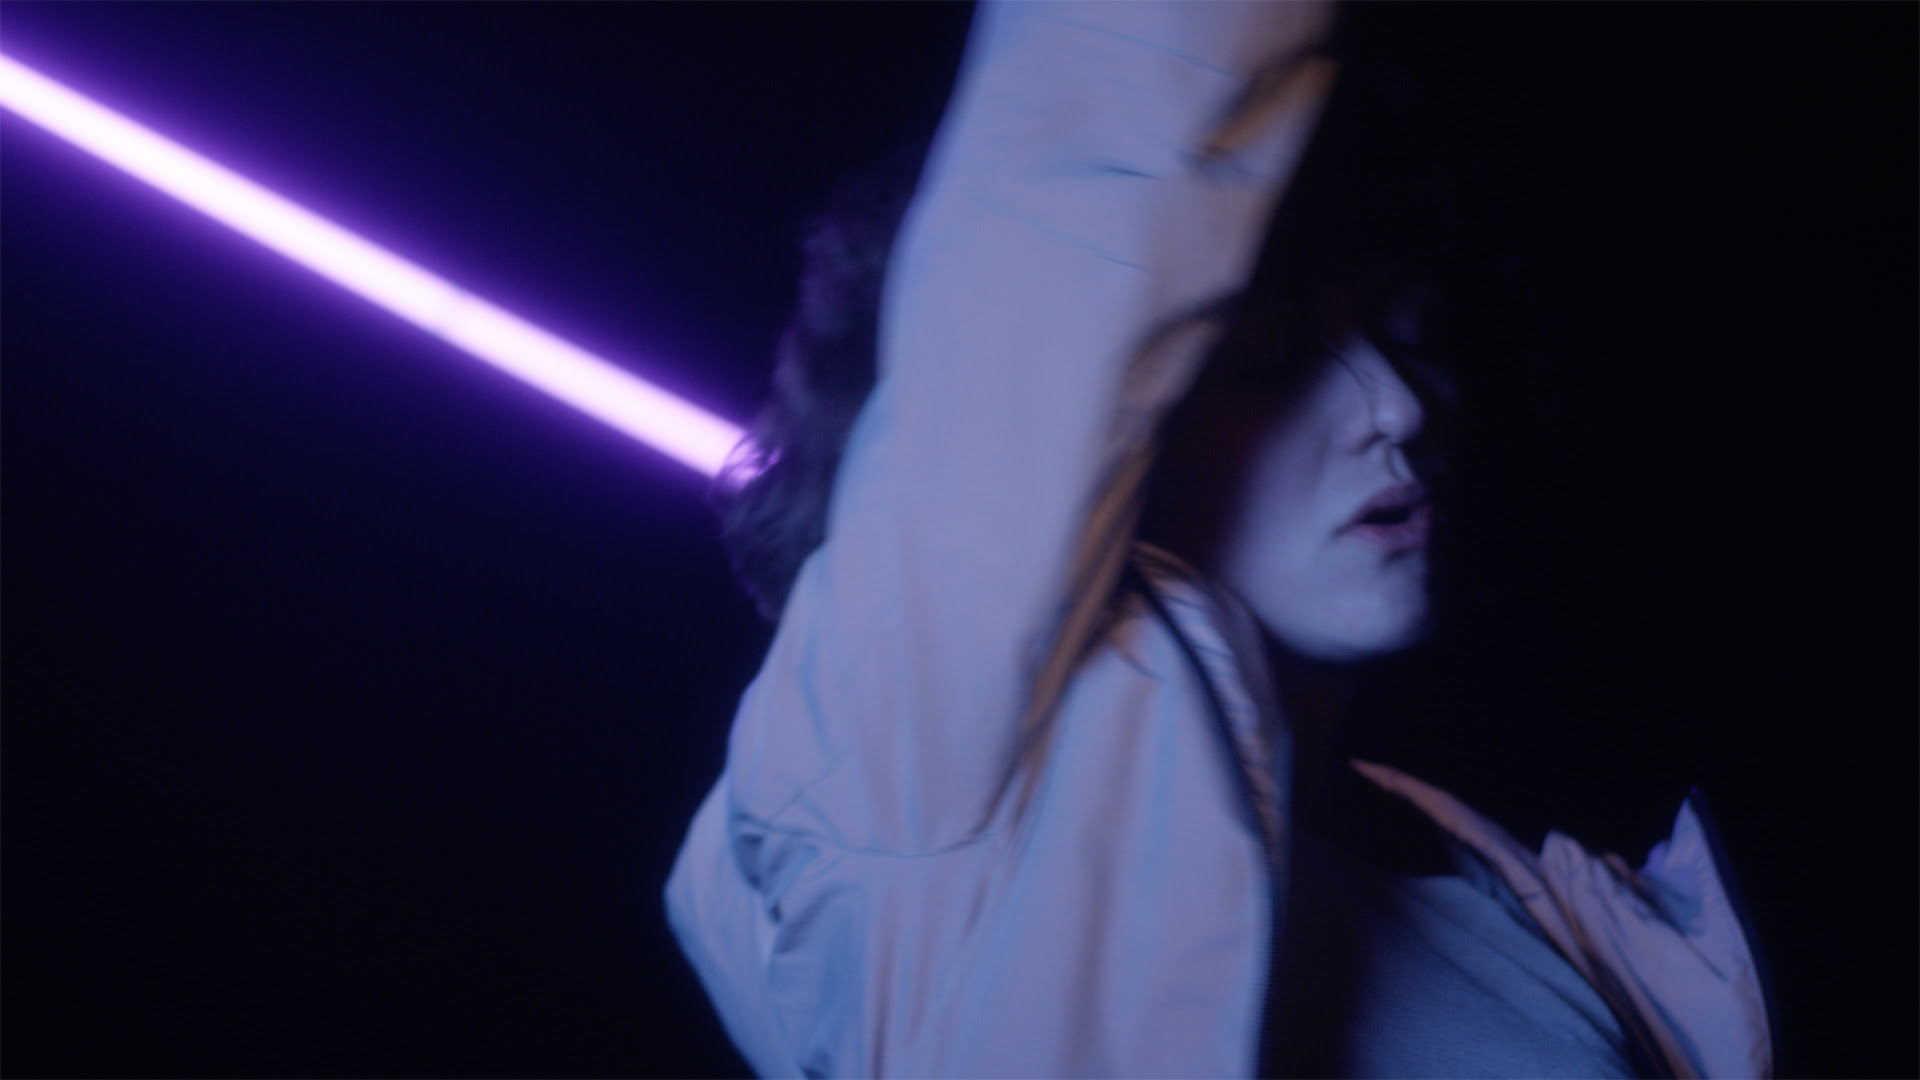 Jessy Lanza releases new video for "Oh No", the title track of her latest release for Hyperdub.